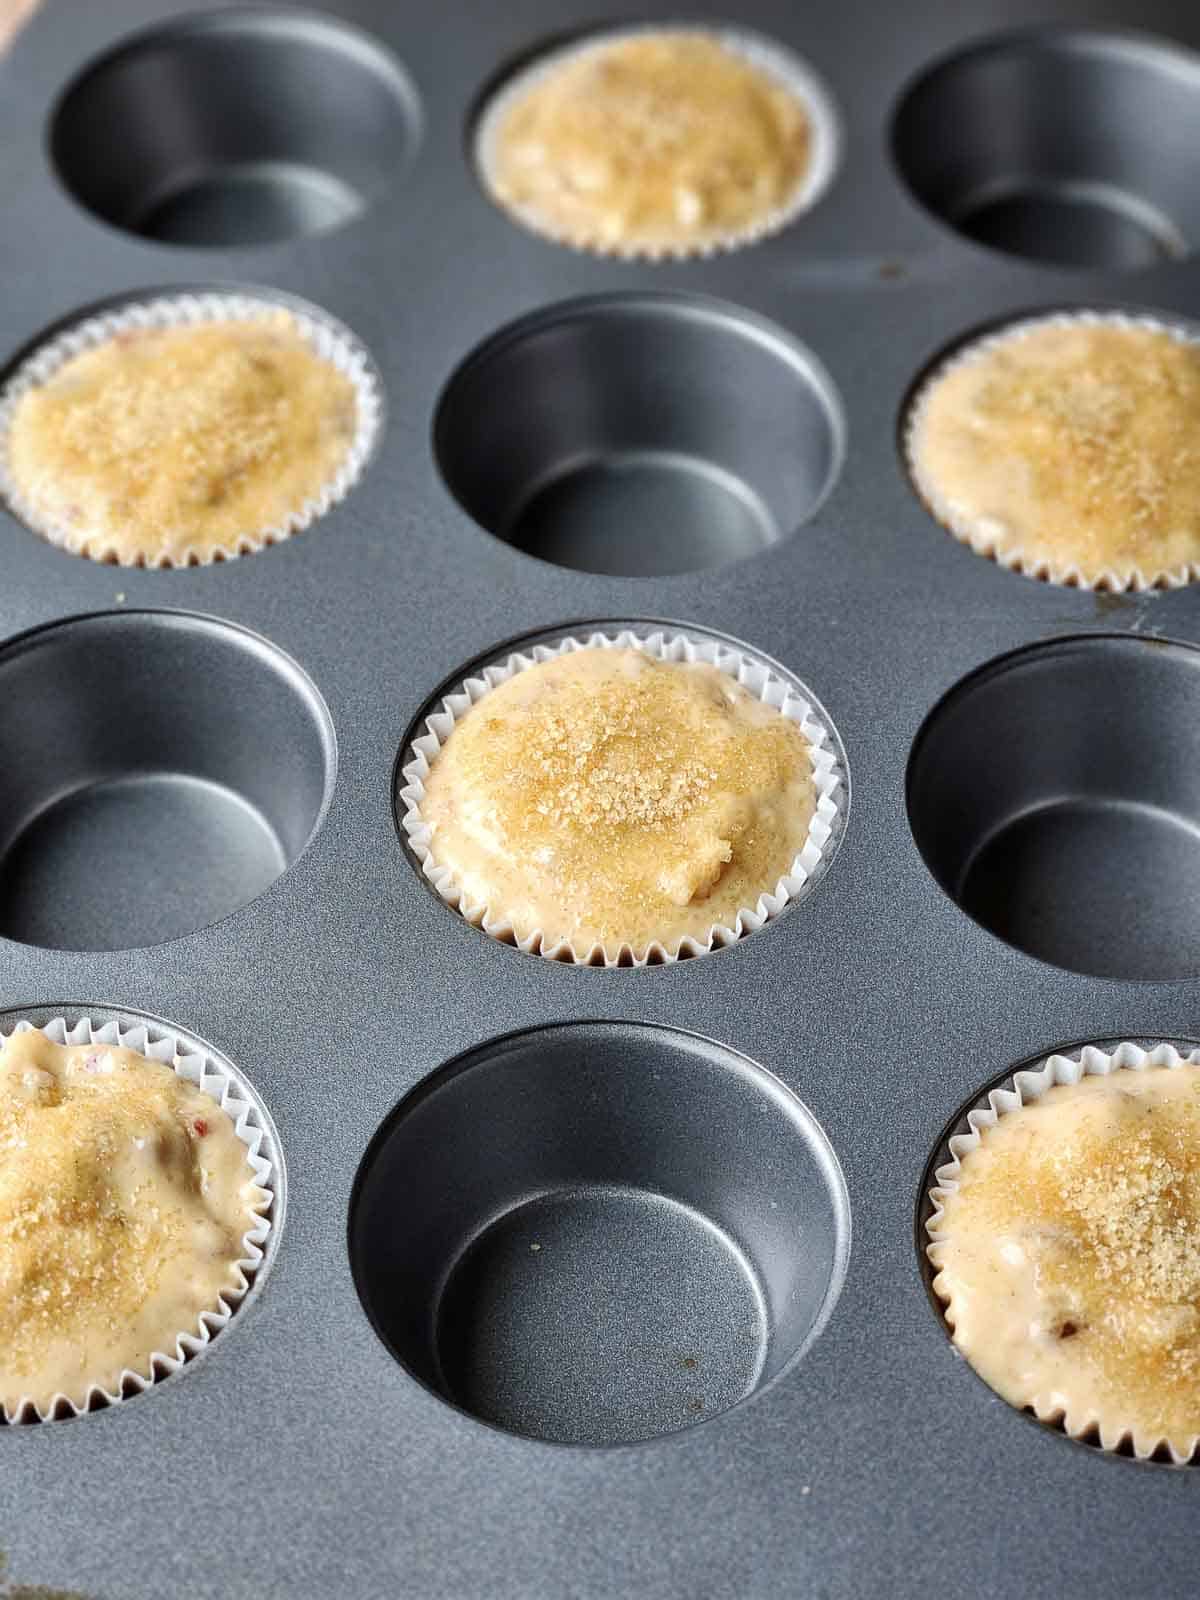 Six muffin cups filled with batter in a metal pan.